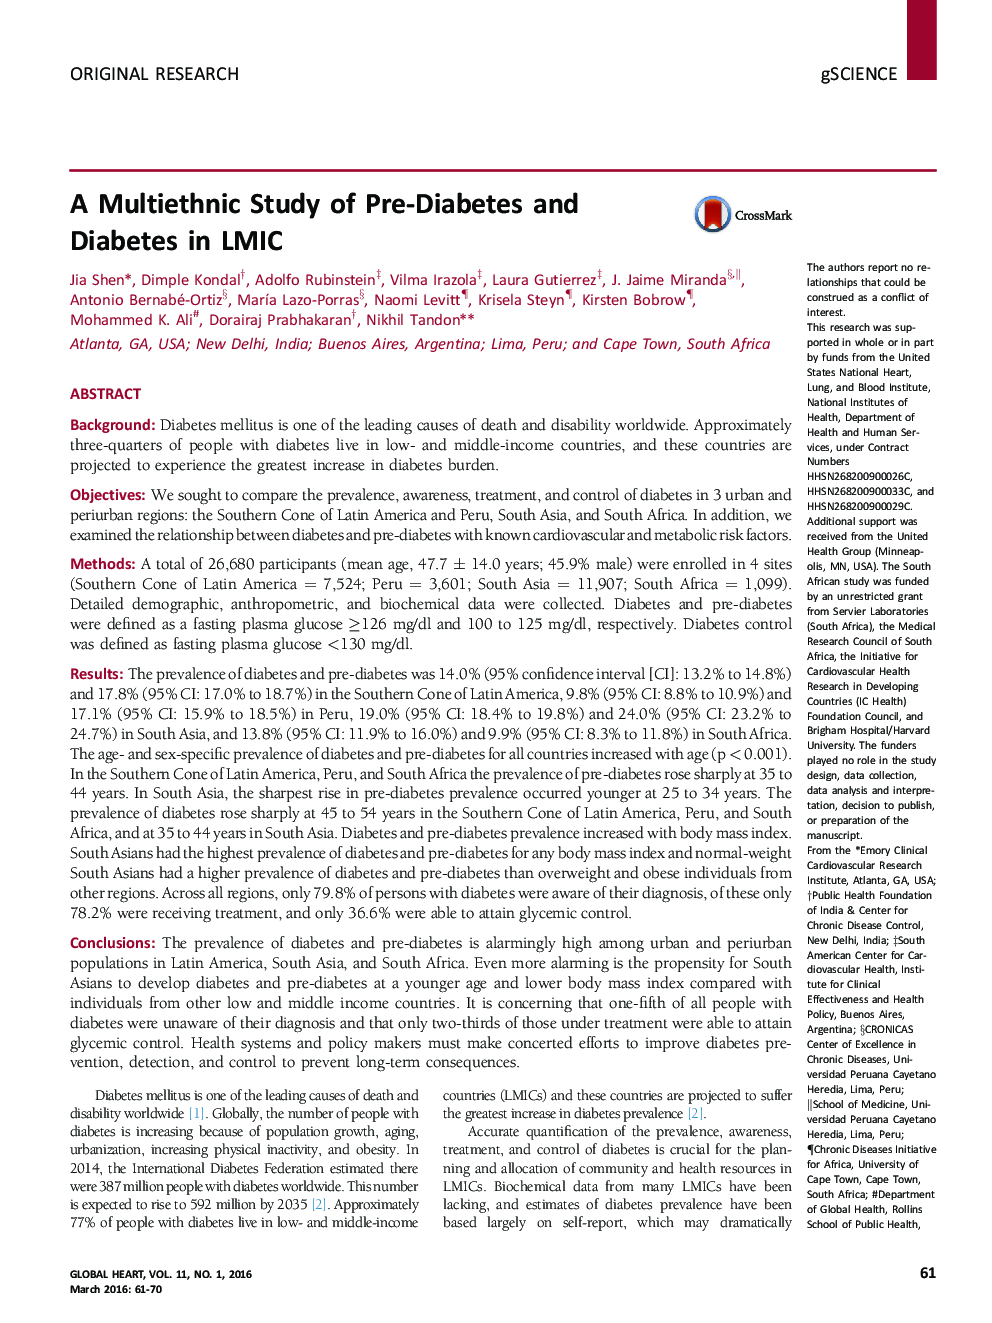 A Multiethnic Study of Pre-Diabetes and Diabetes in LMIC